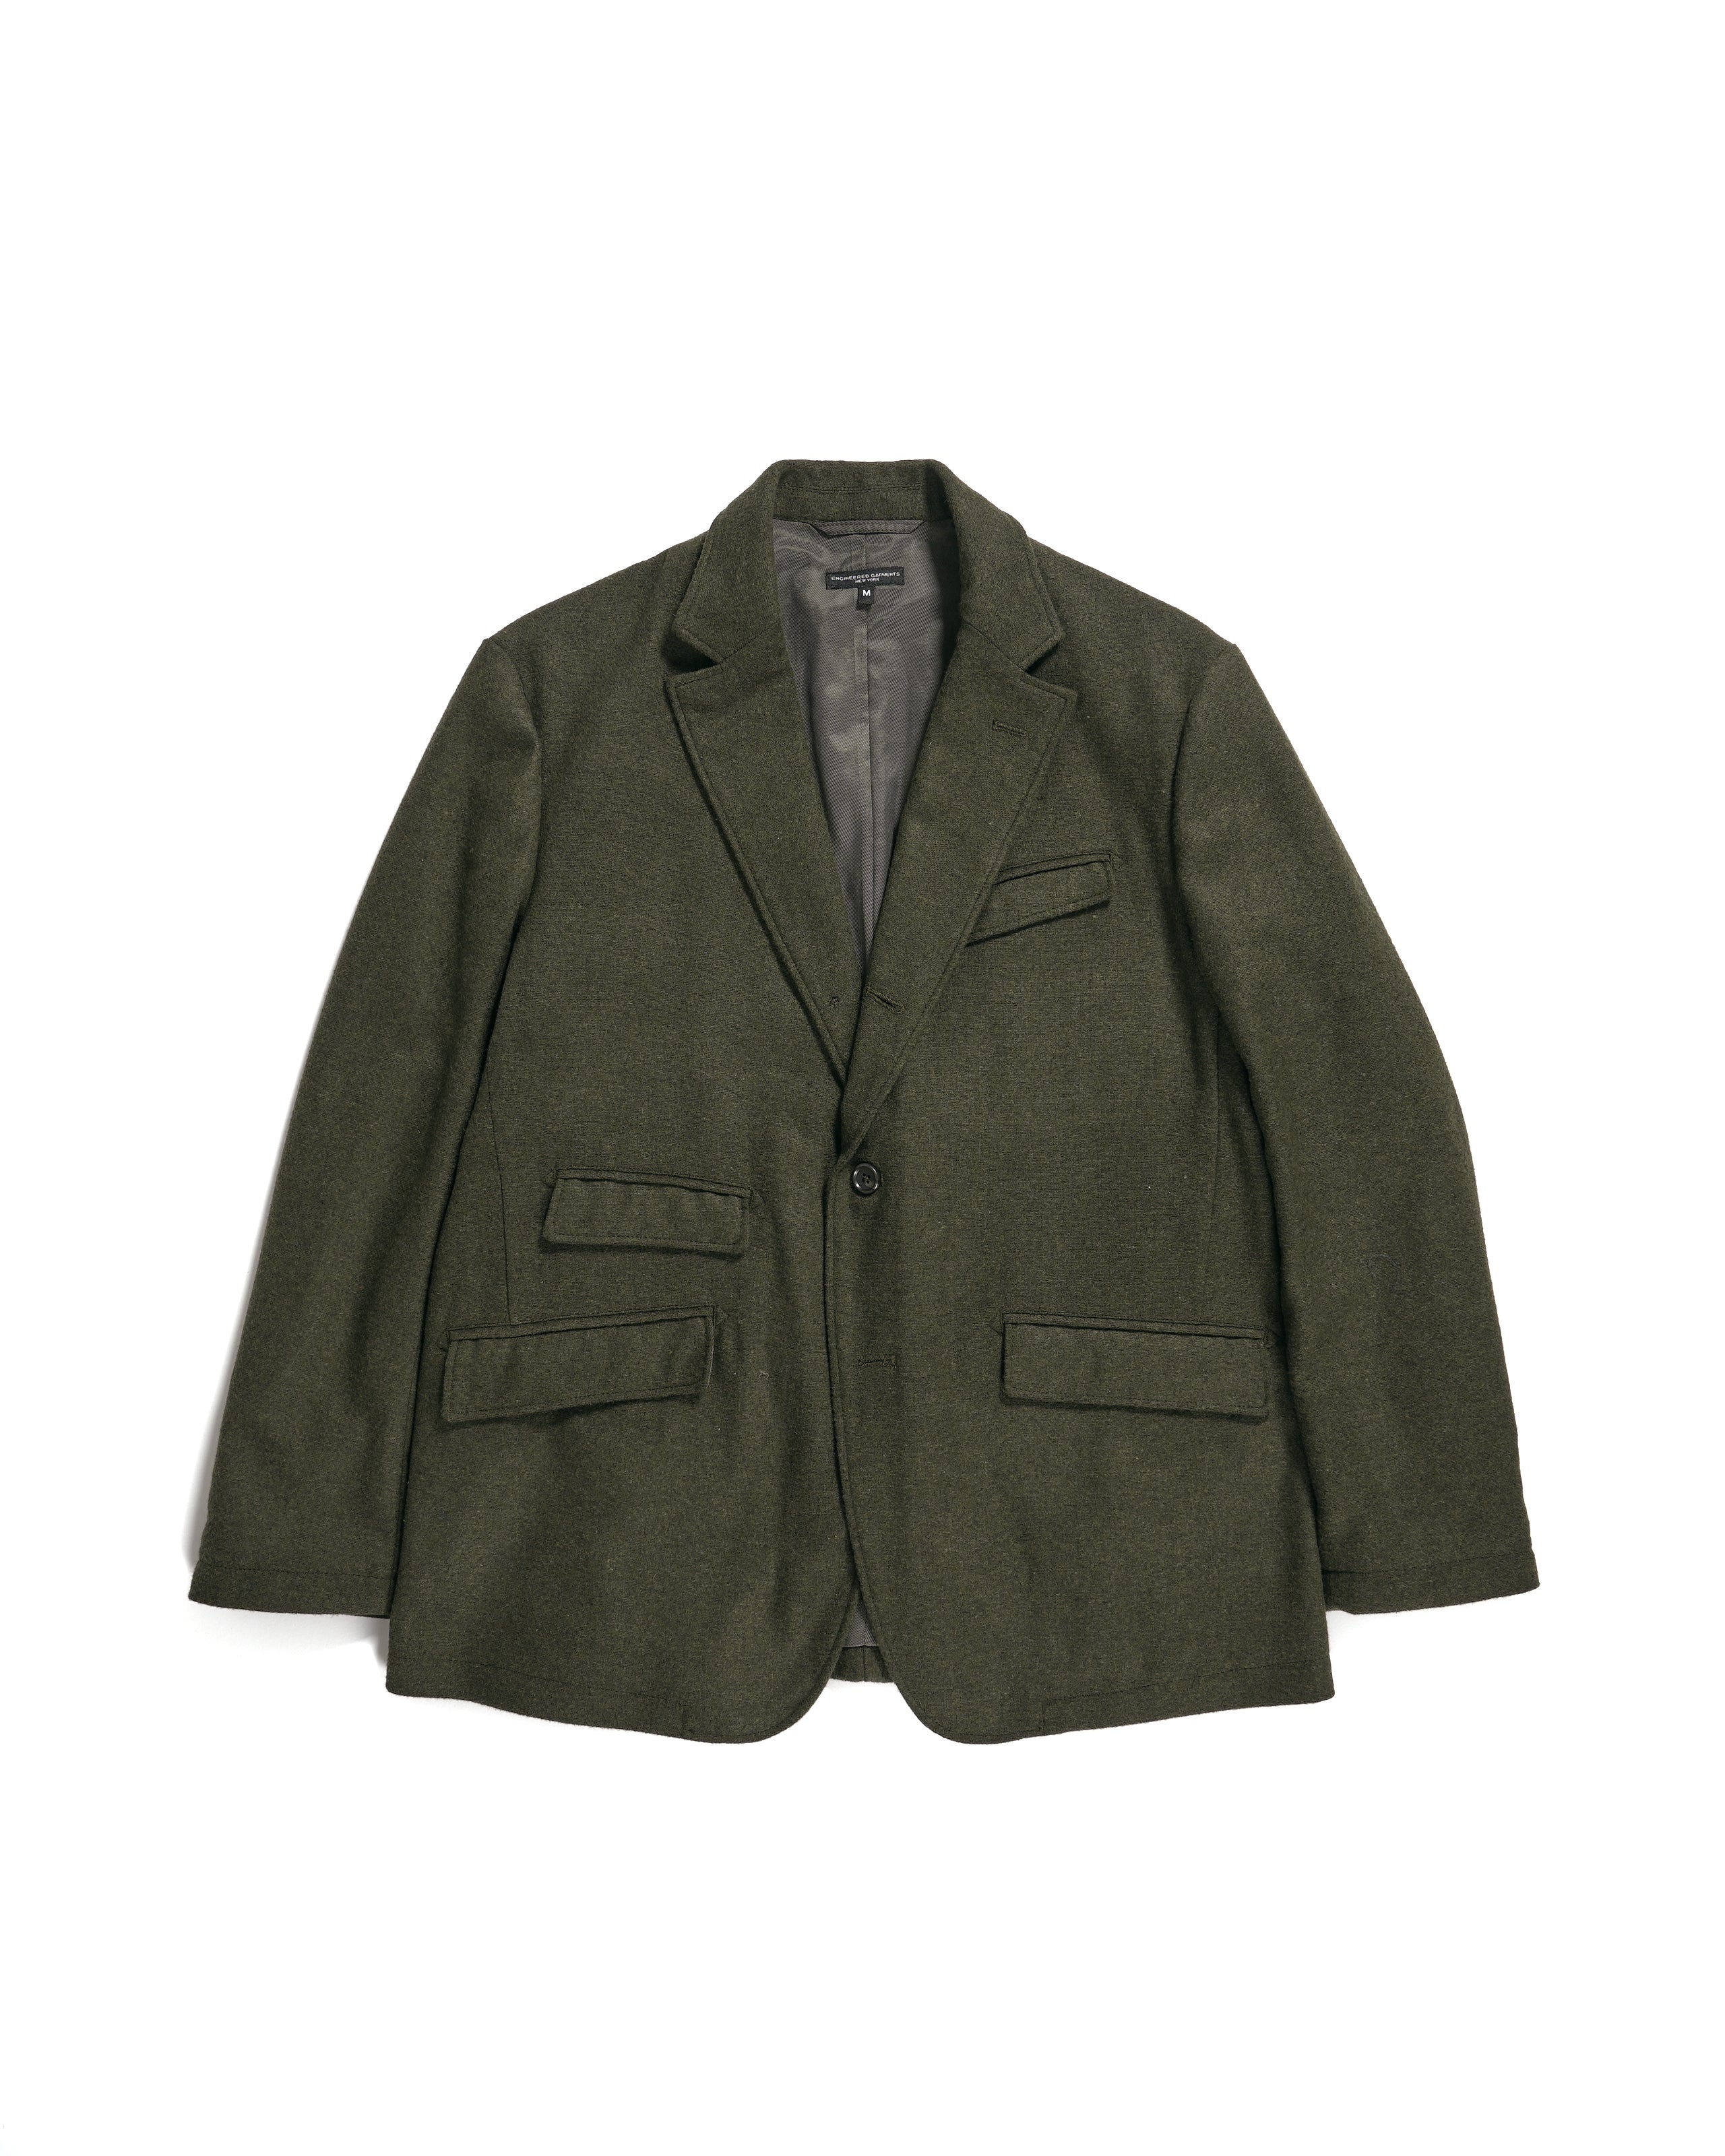 Andover Jacket - Olive Solid Poly Wool Flannel